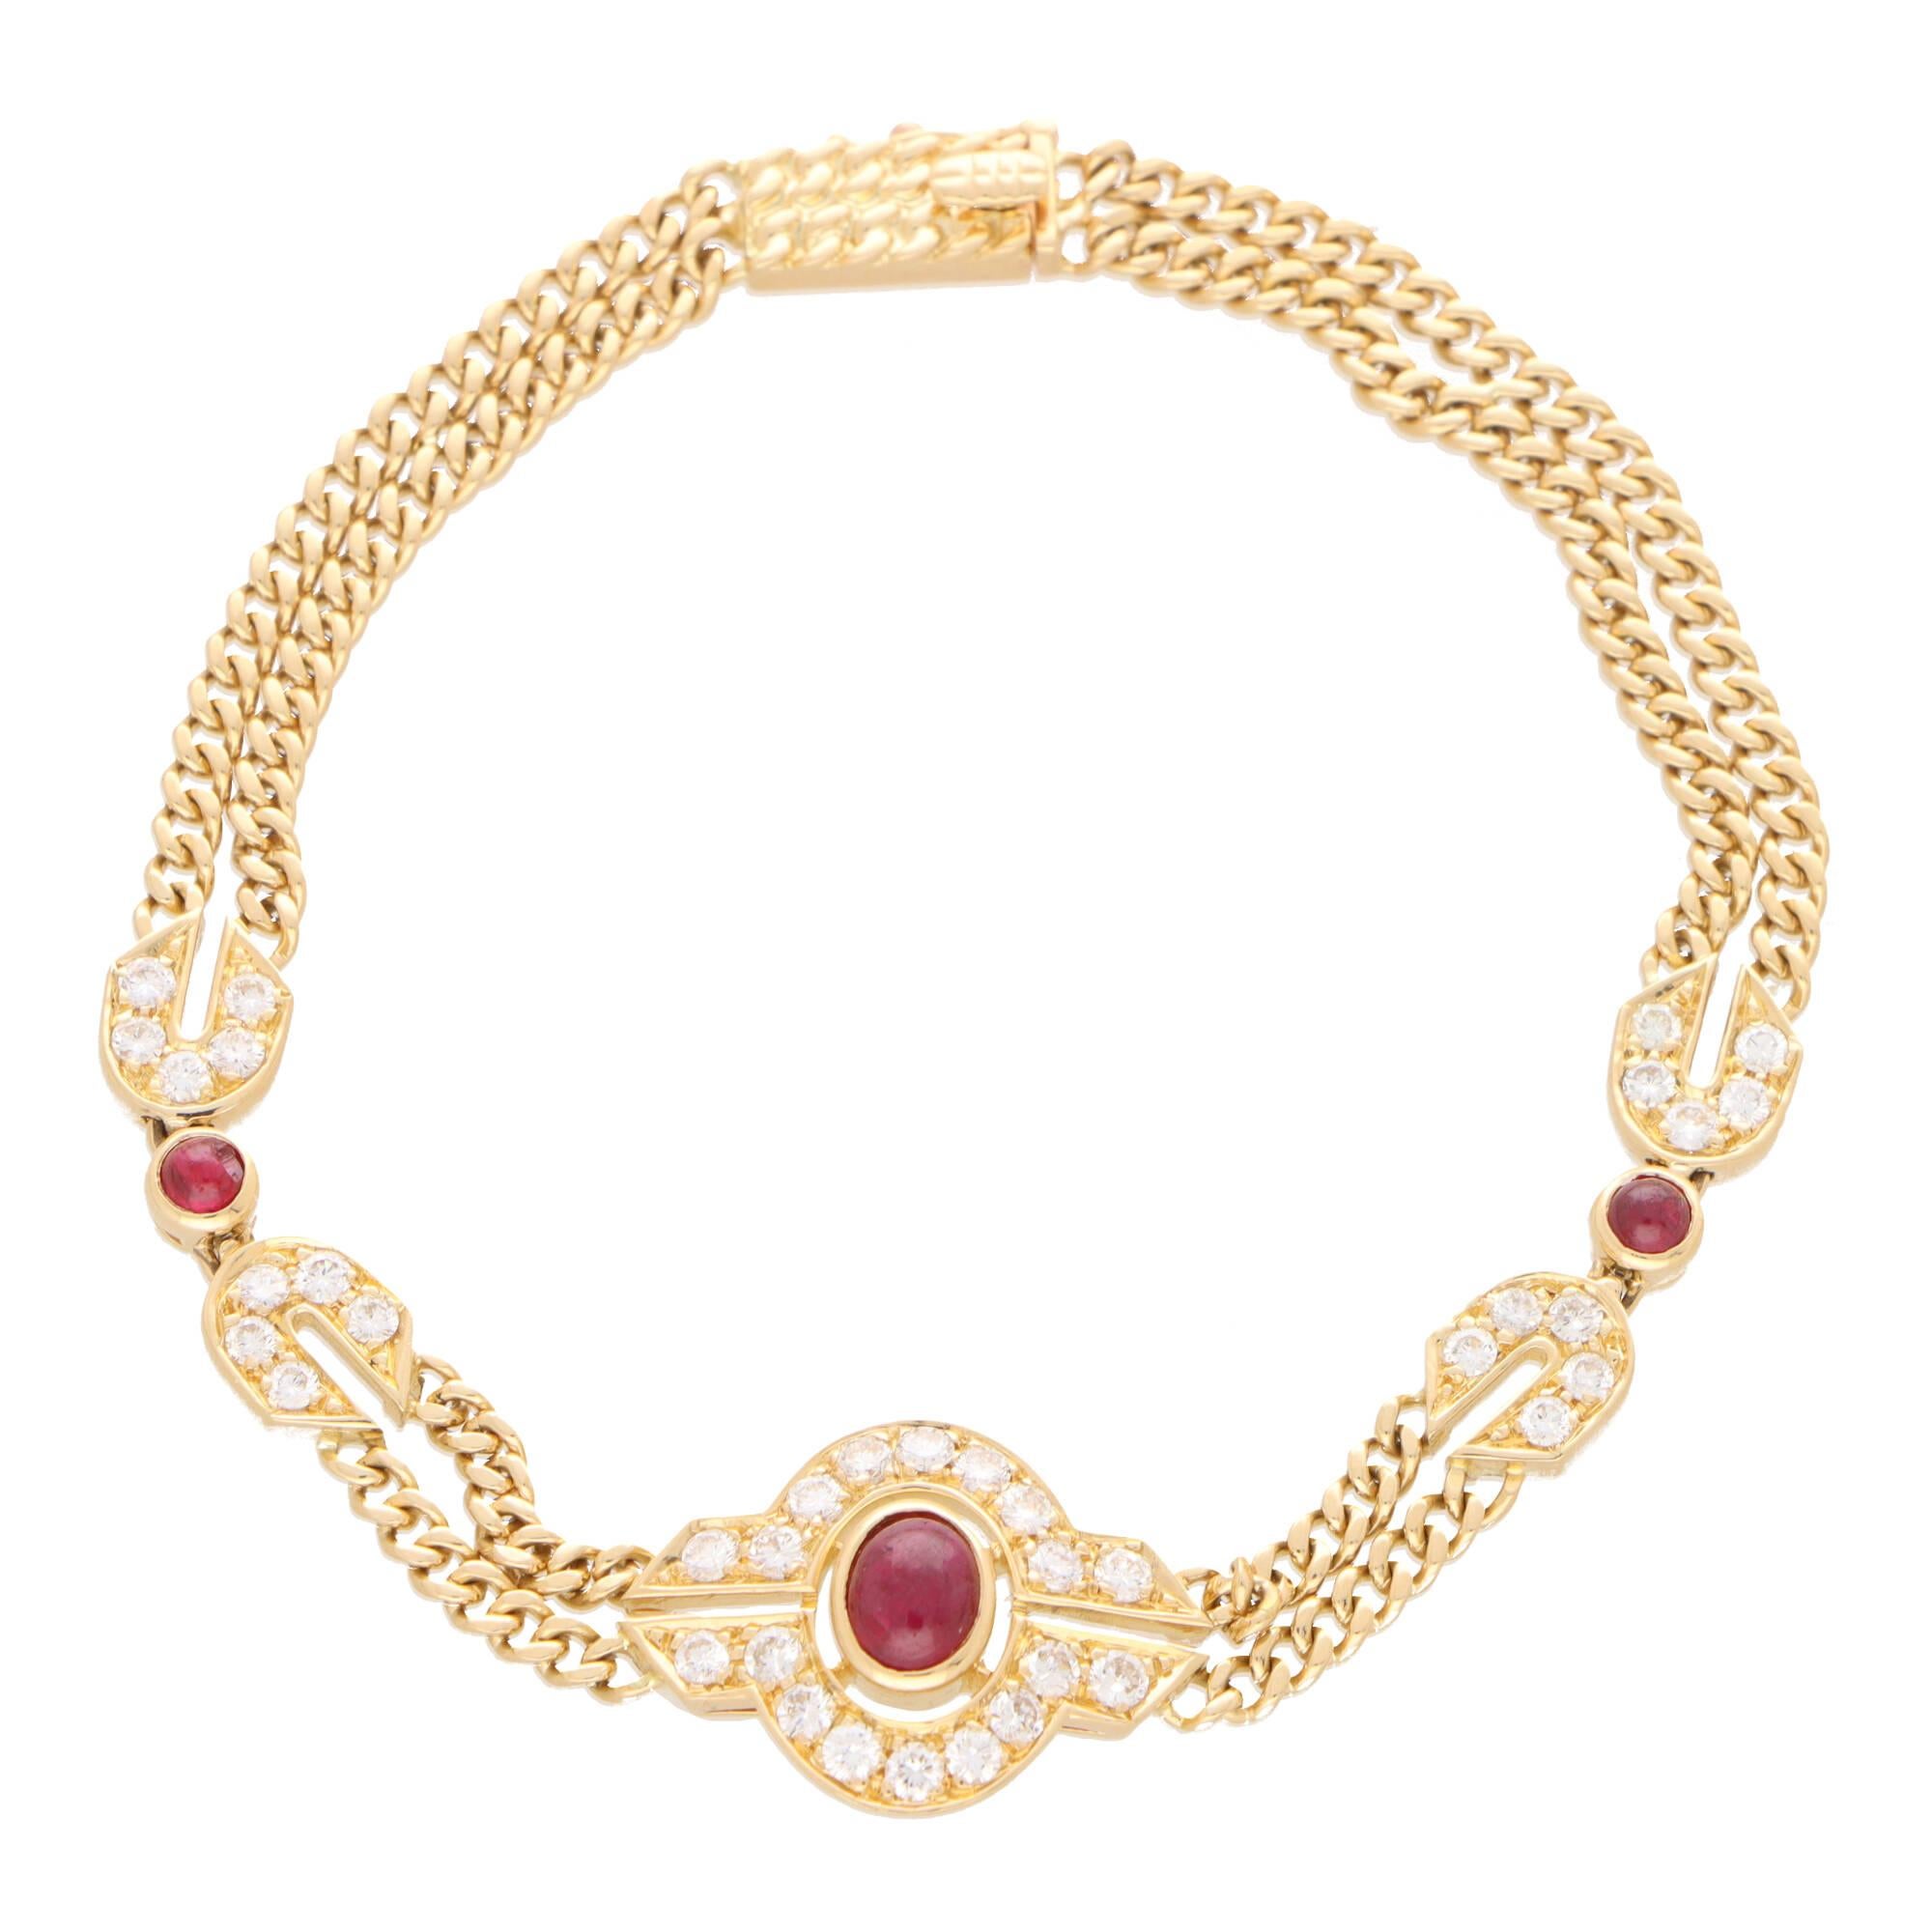 A beautiful vintage Mauboussin ruby and diamond Etruscan inspired chain bracelet set in 18k yellow gold.

The bracelet is centrally set with an openwork Etruscan inspired motif, set to the centre with a large oval cabochon ruby, and surrounded by